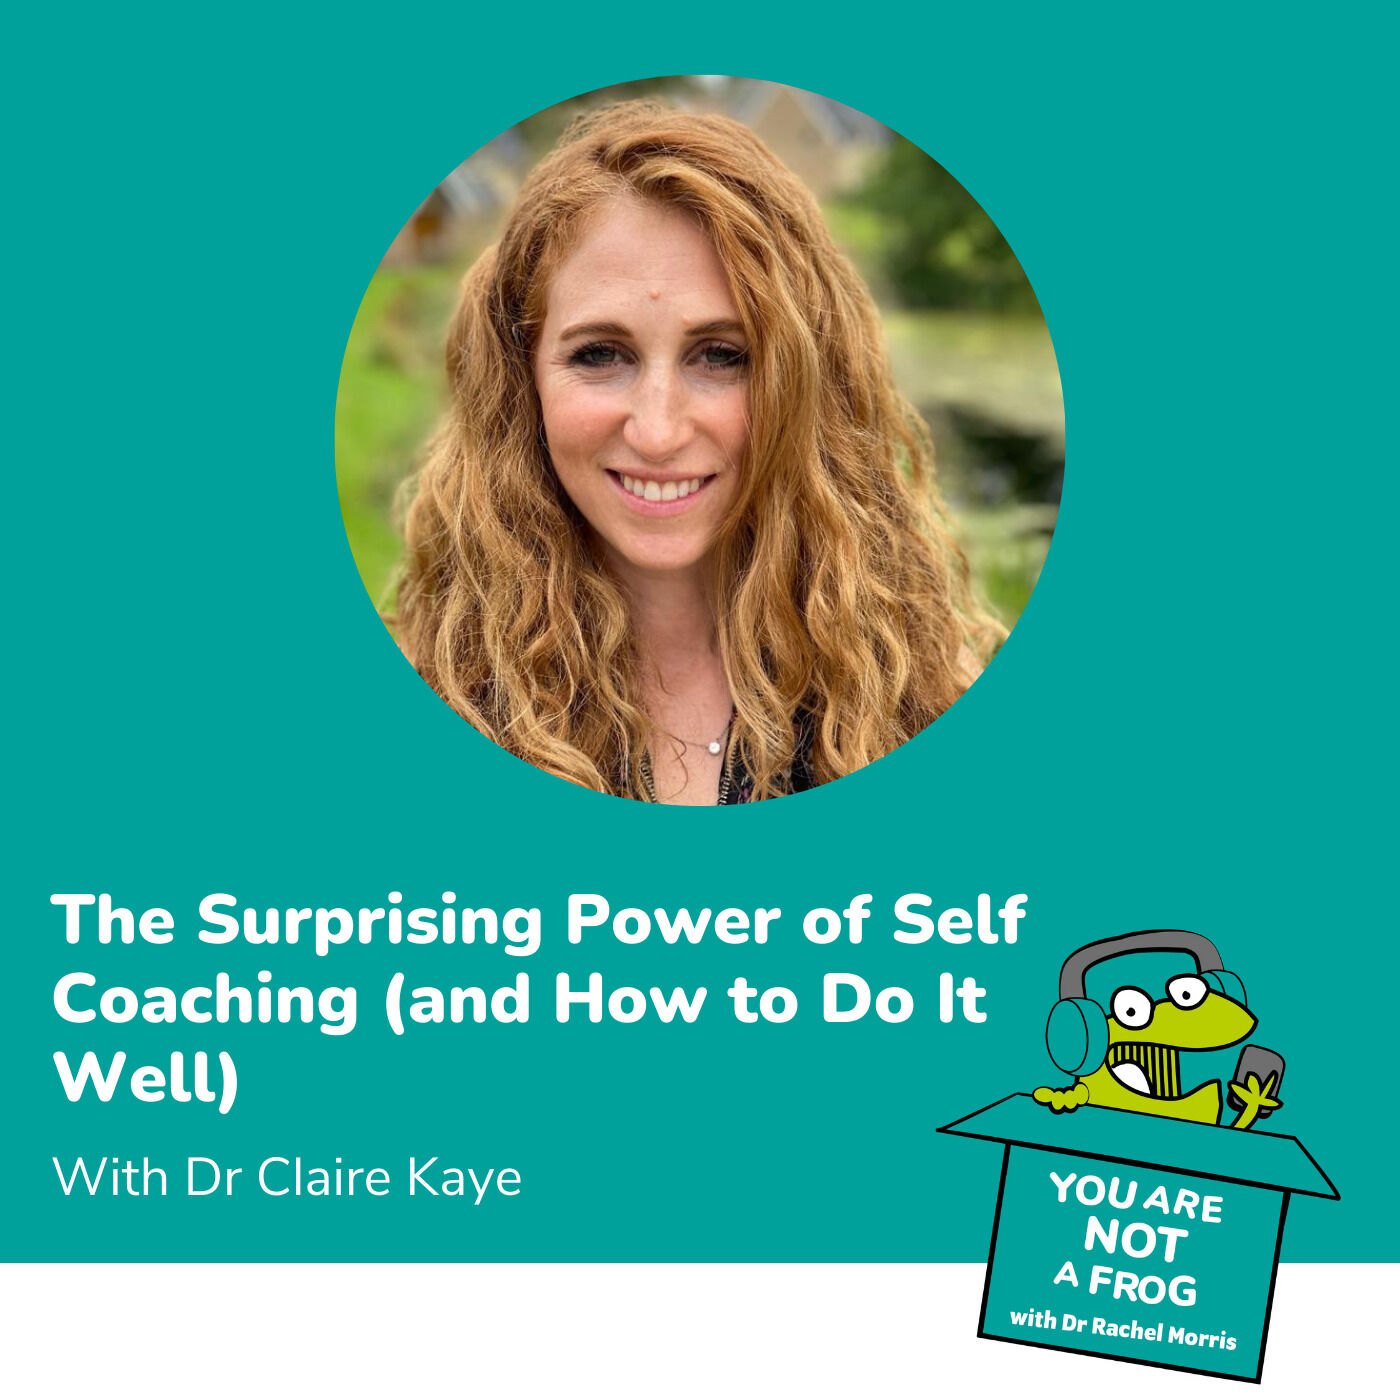 The Surprising Power of Self Coaching (and How to Do it Well)